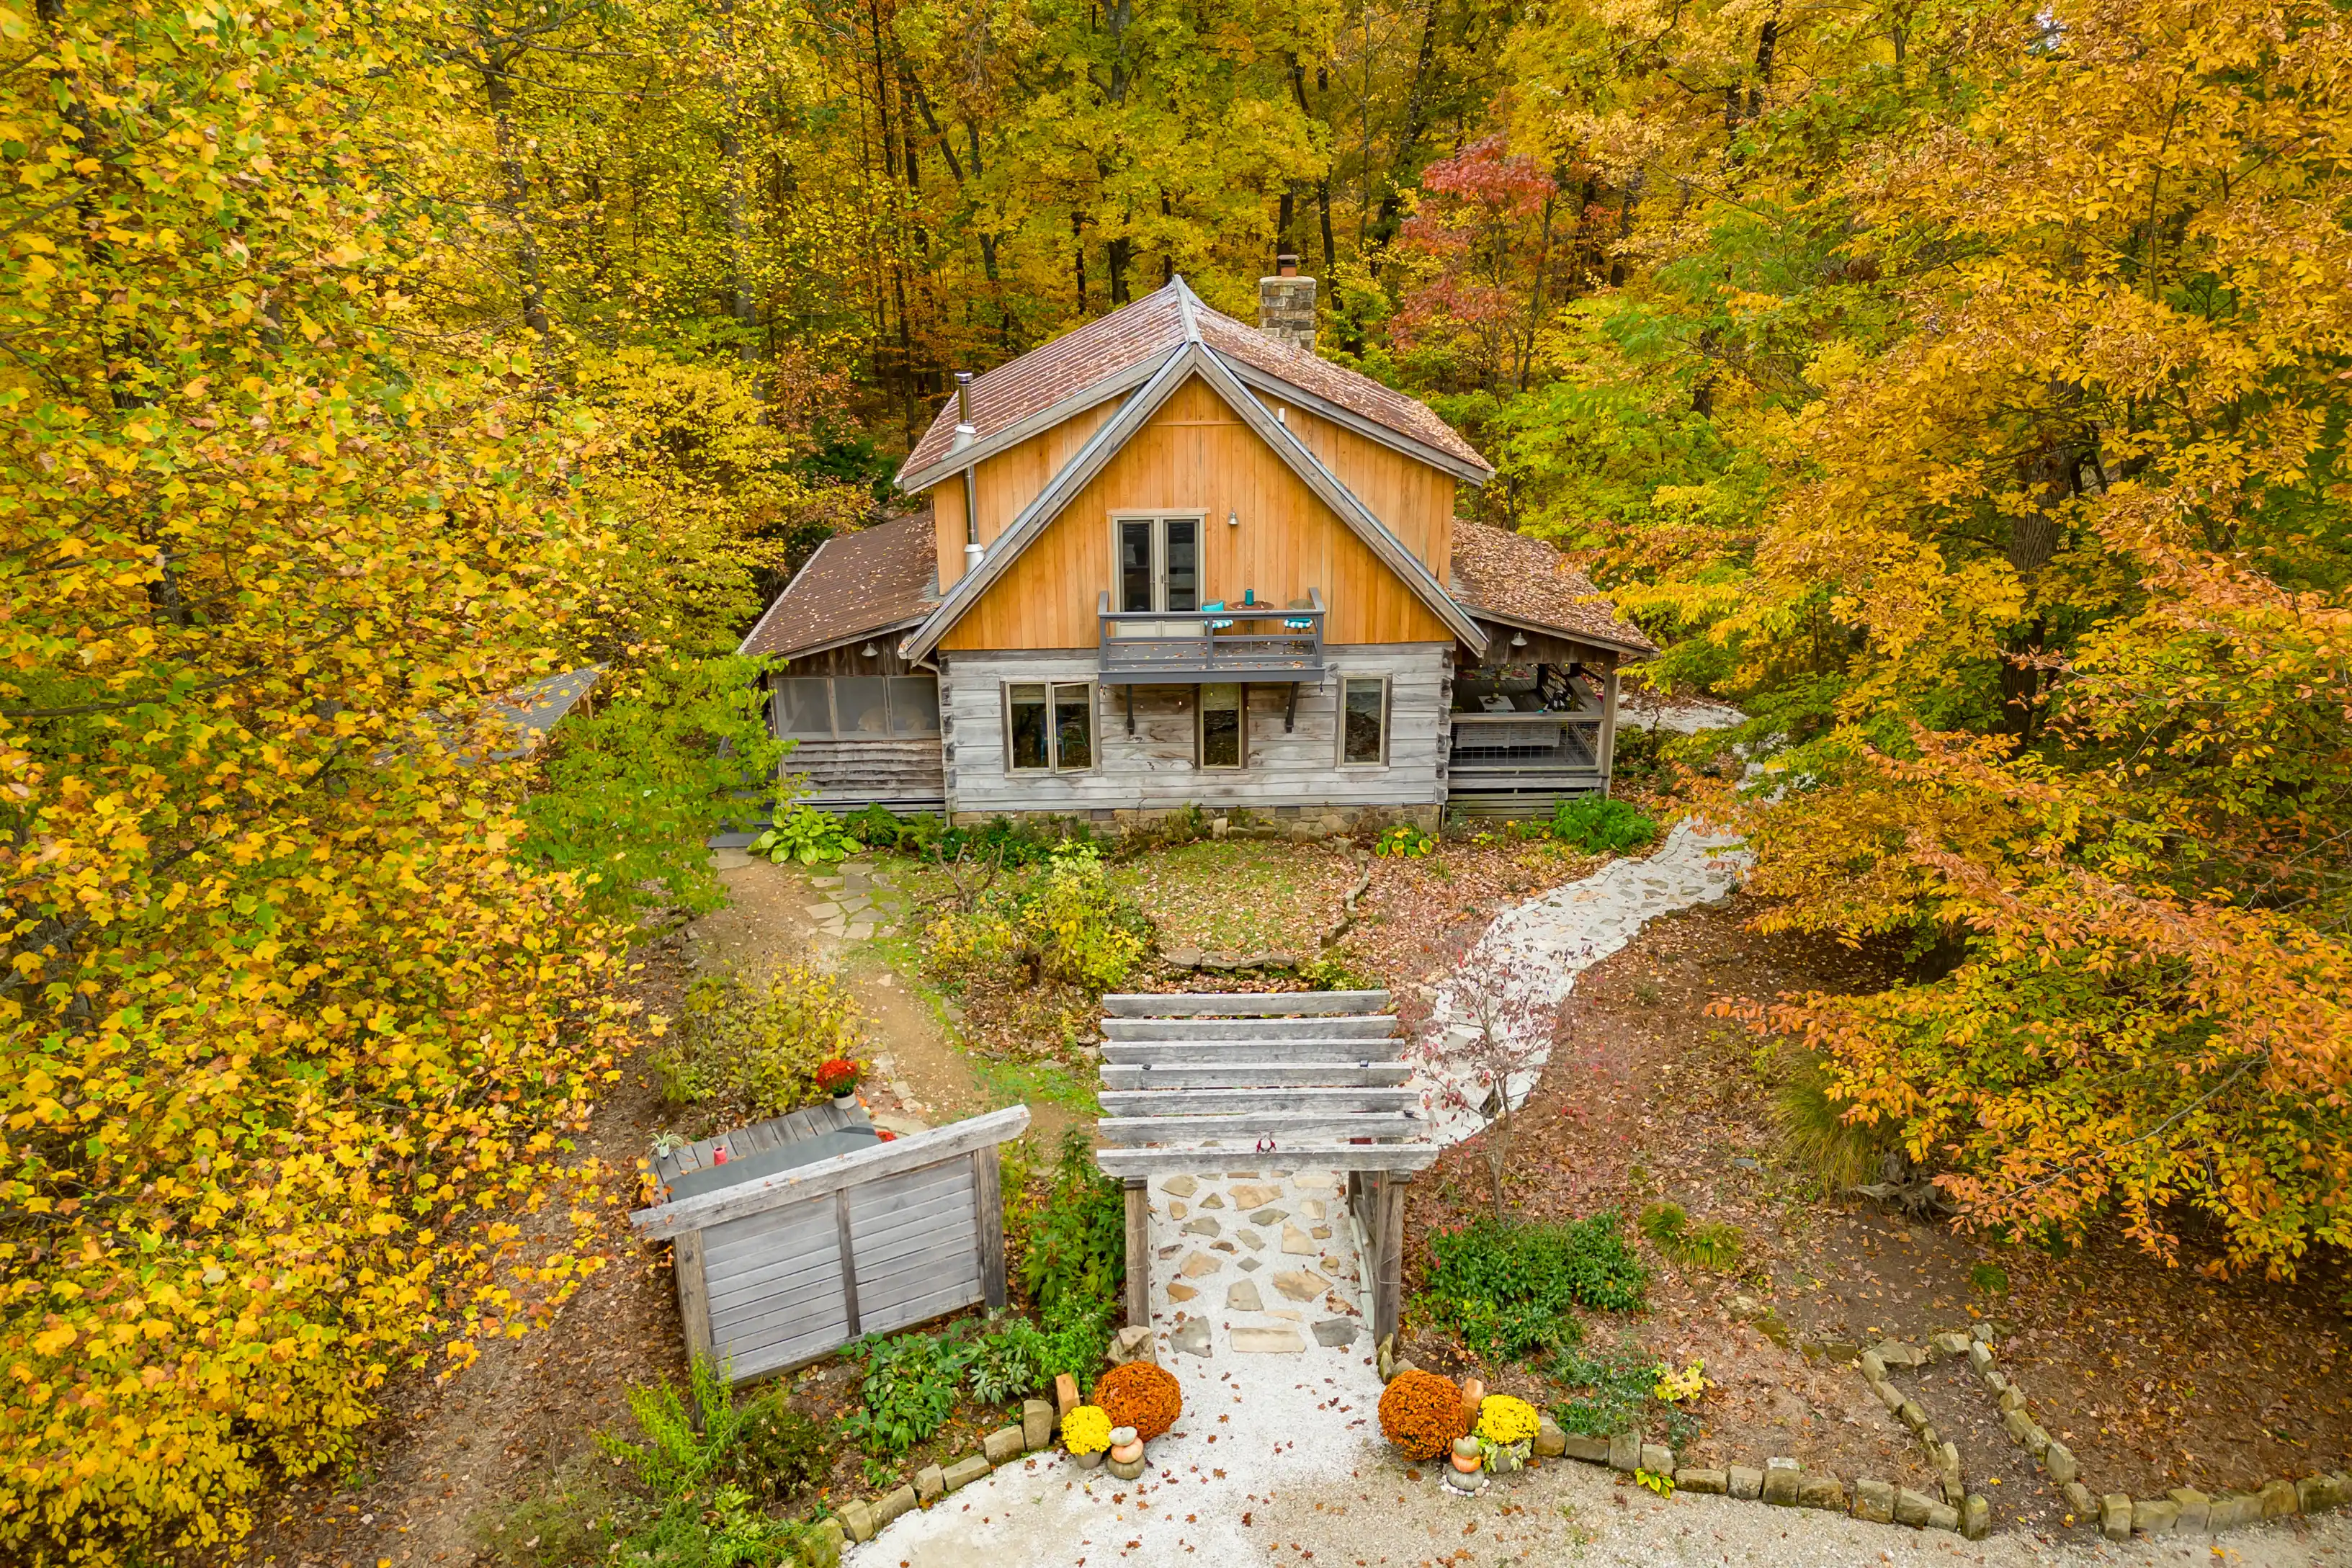 Aerial view of a quaint wooden cabin surrounded by lush autumn foliage with a path leading to a rustic entryway adorned with seasonal decorations.